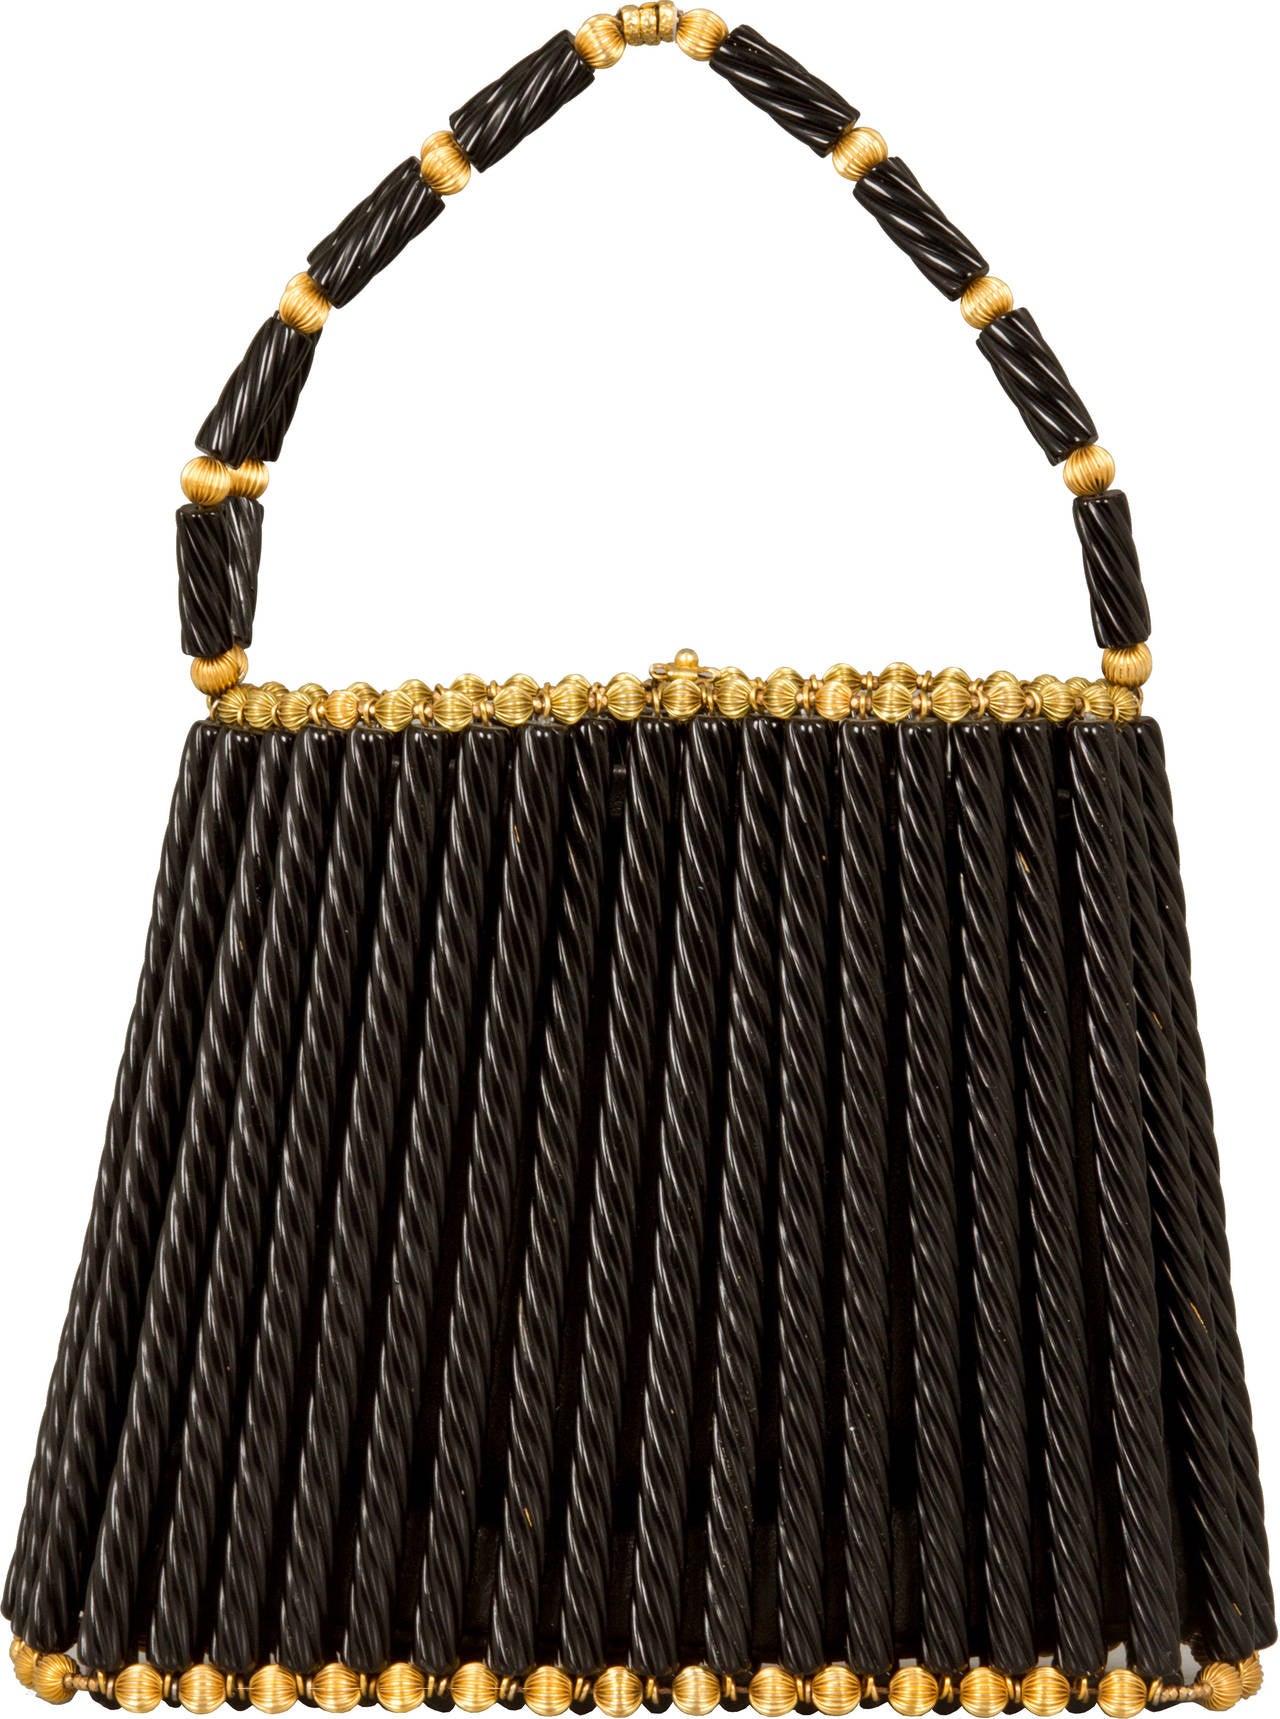 This is an interesting bag made of black licorice like elements accented with gilt beads. The interior lining is black is leather.